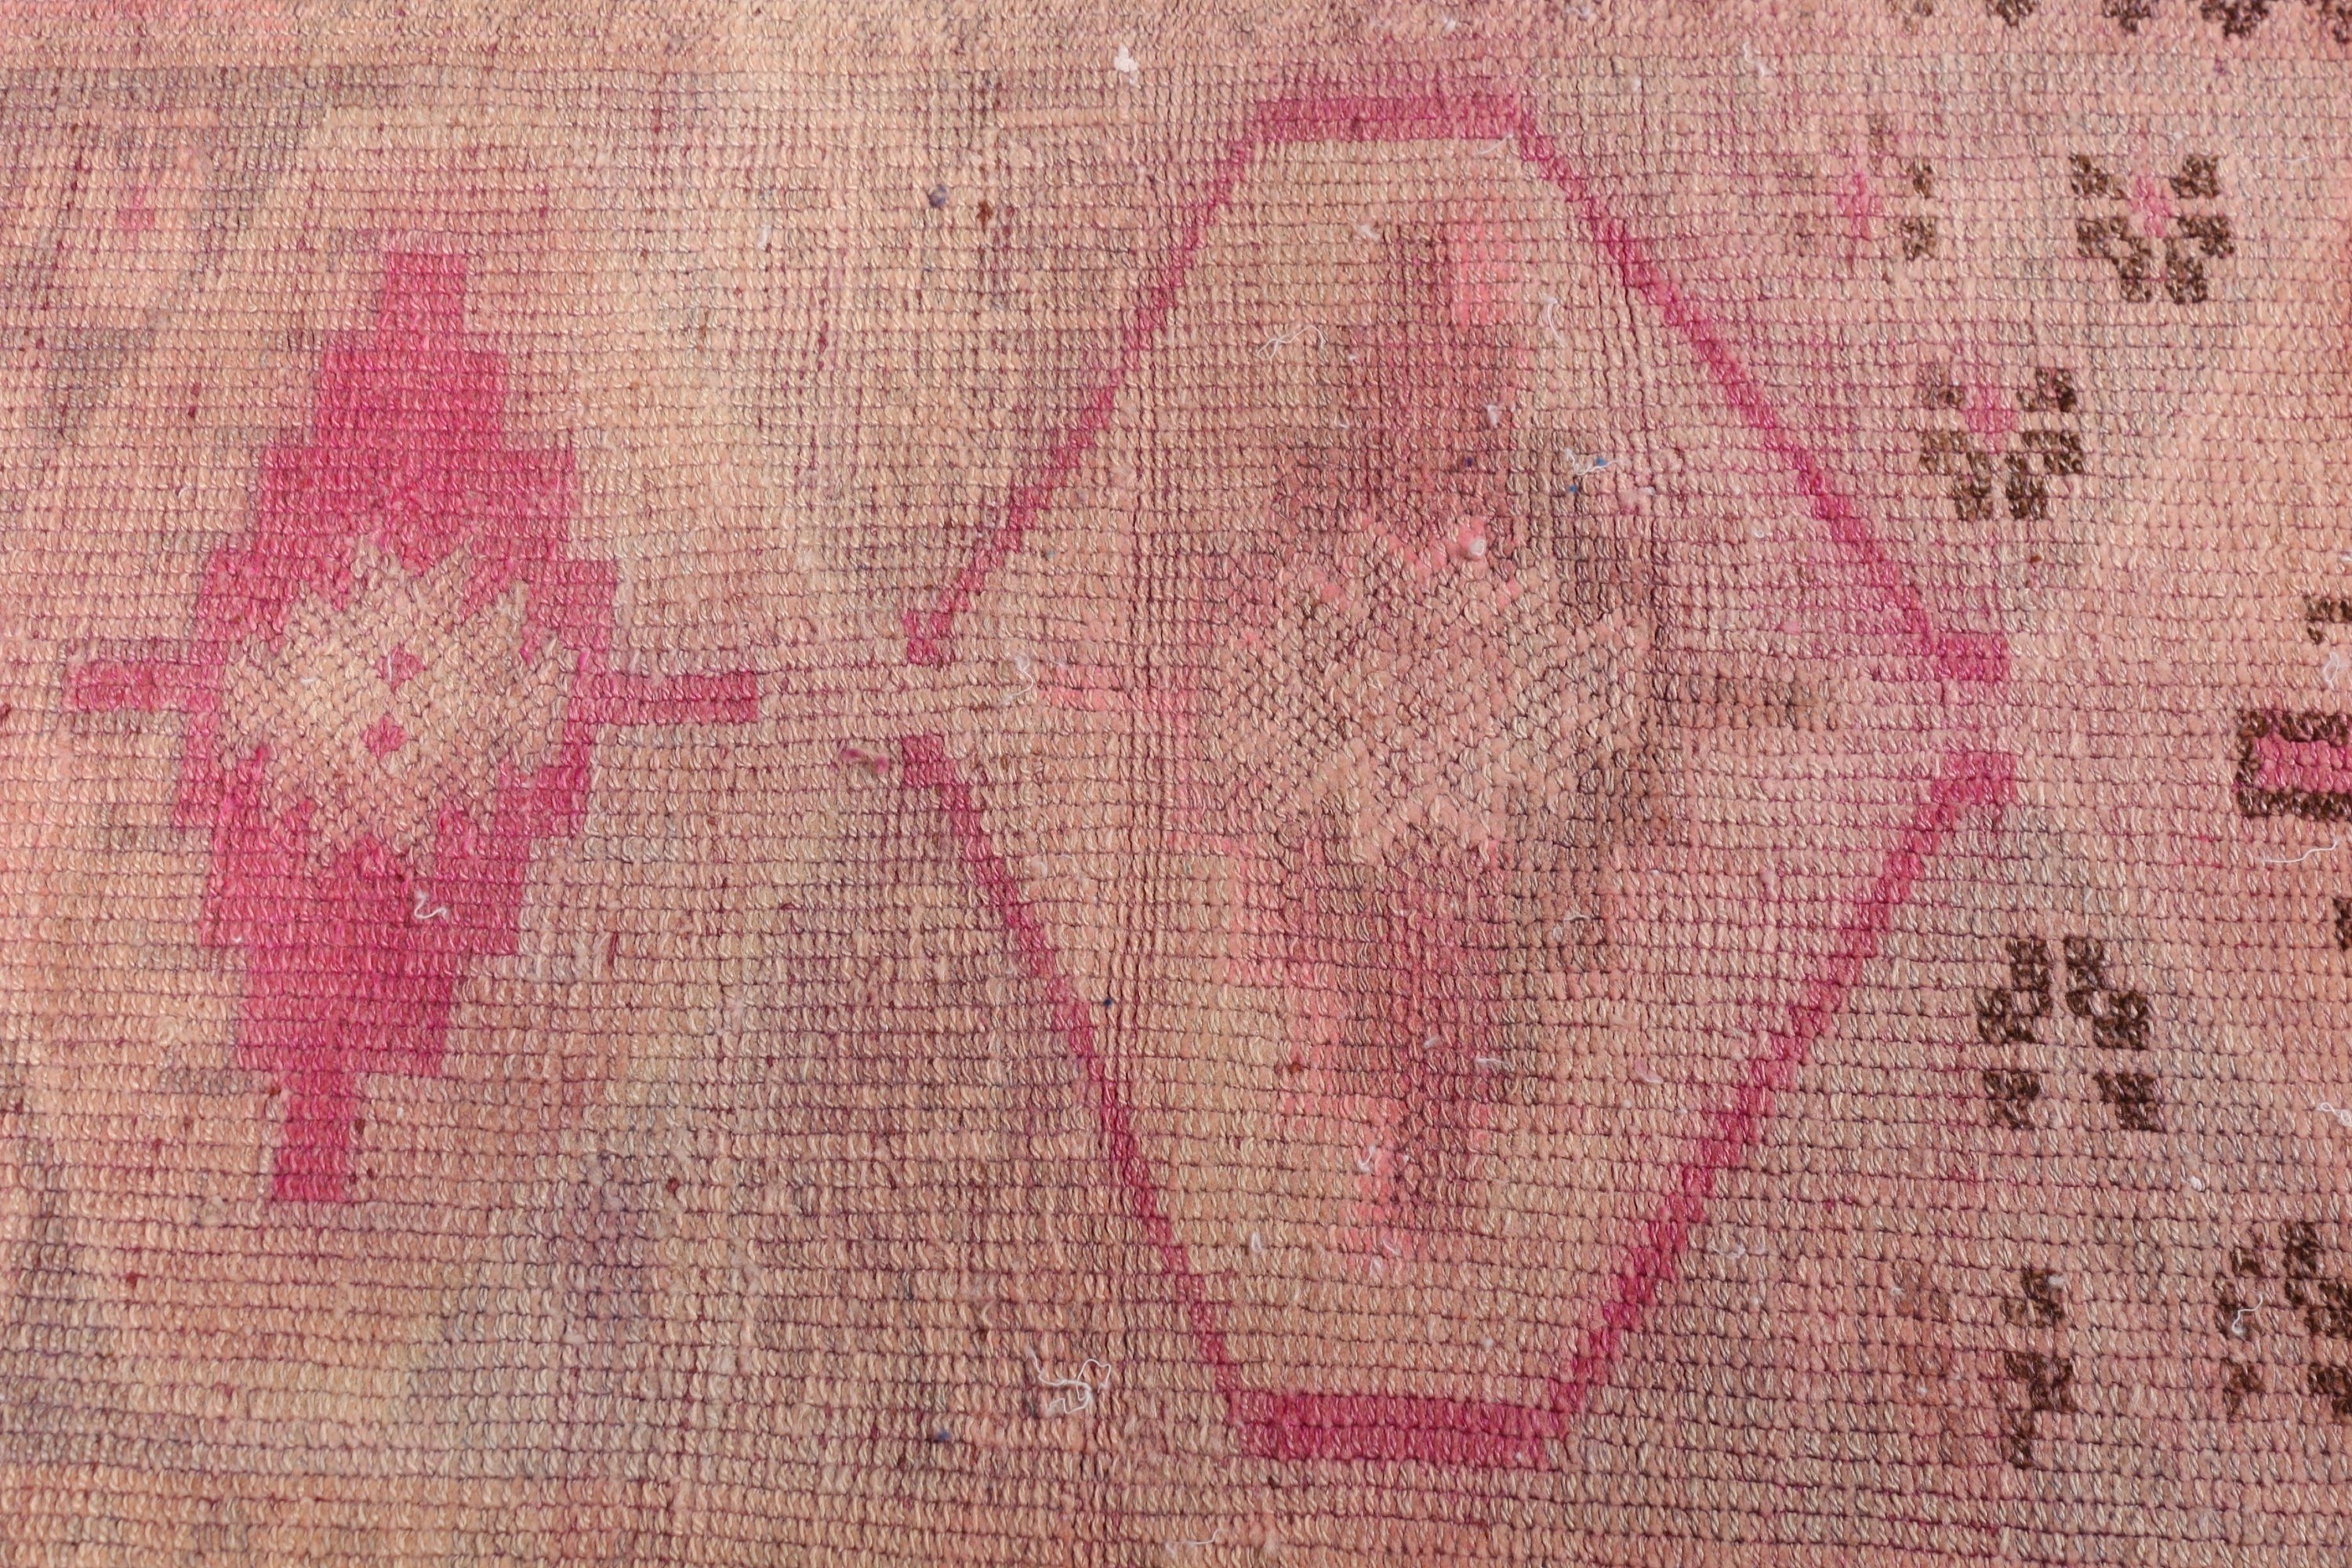 Dorm Rugs, Pink Antique Rug, 2.7x9 ft Runner Rugs, Kitchen Rug, Anatolian Rug, Vintage Rug, Turkish Rug, Rugs for Kitchen, Home Decor Rugs